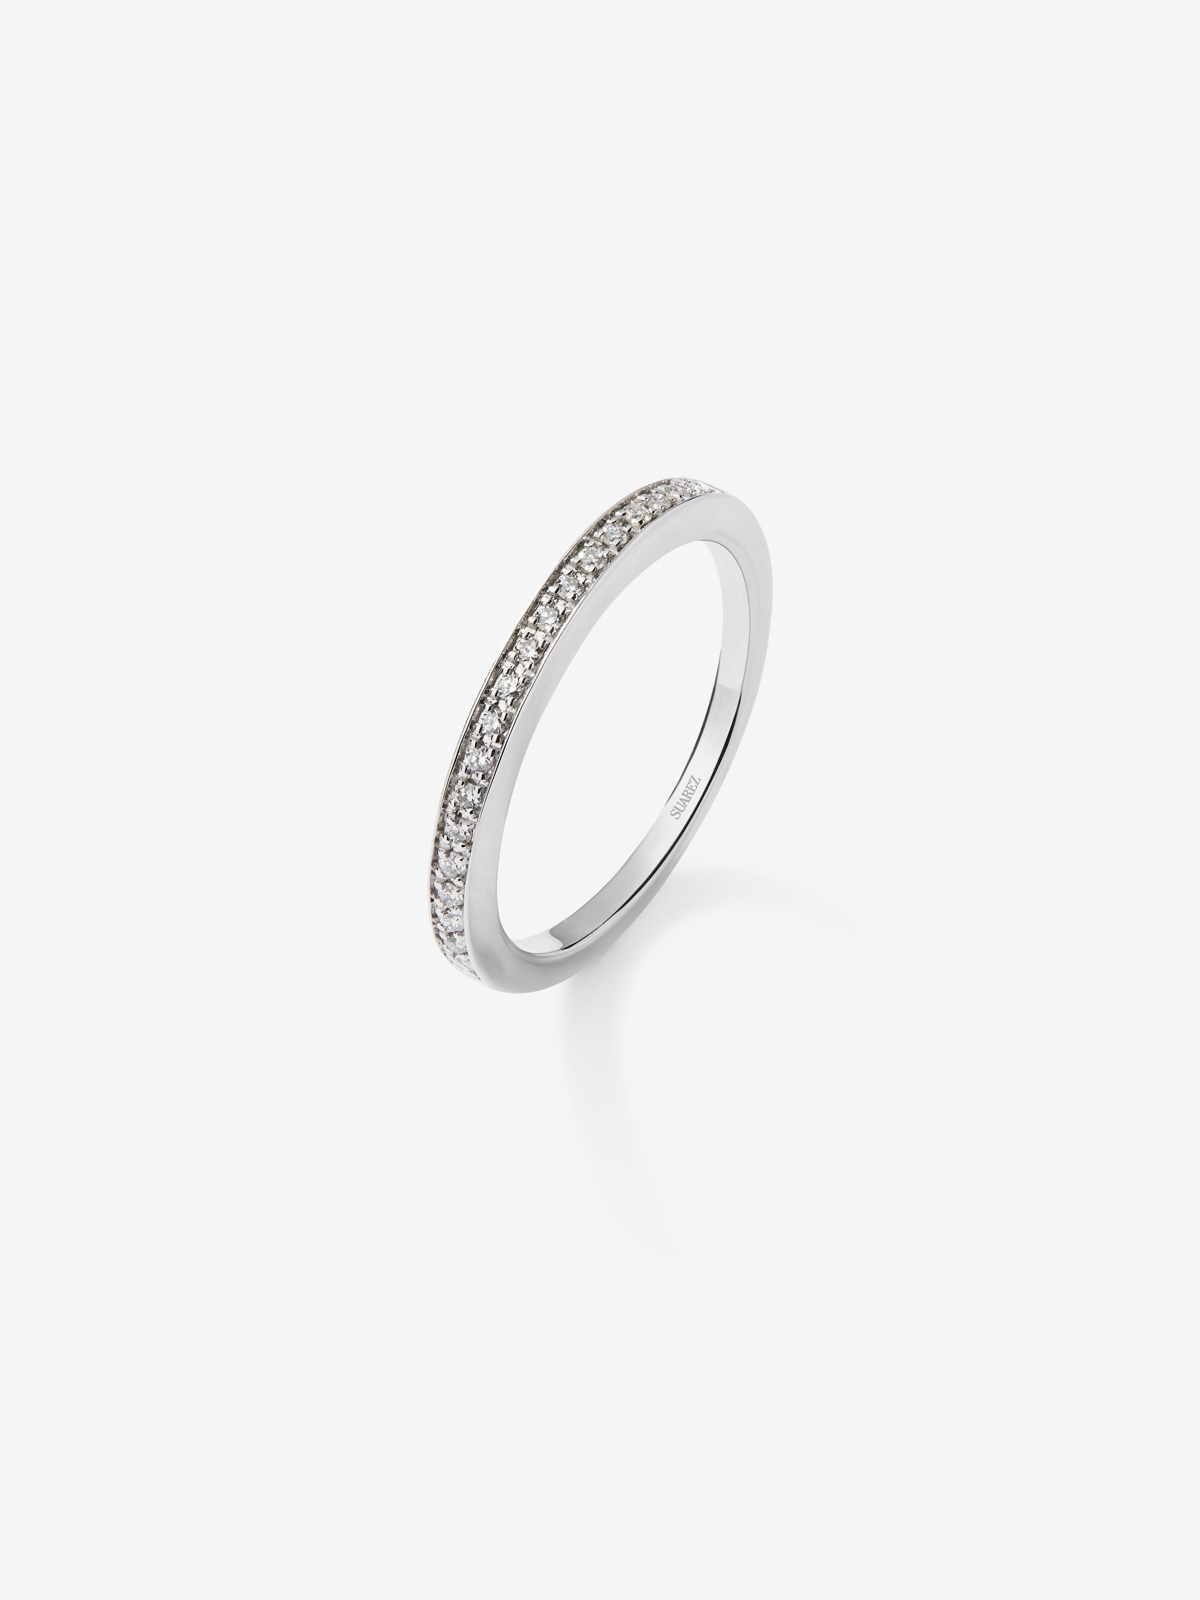 18K White Gold Commitment Ring with white diamonds of 0.1 cts